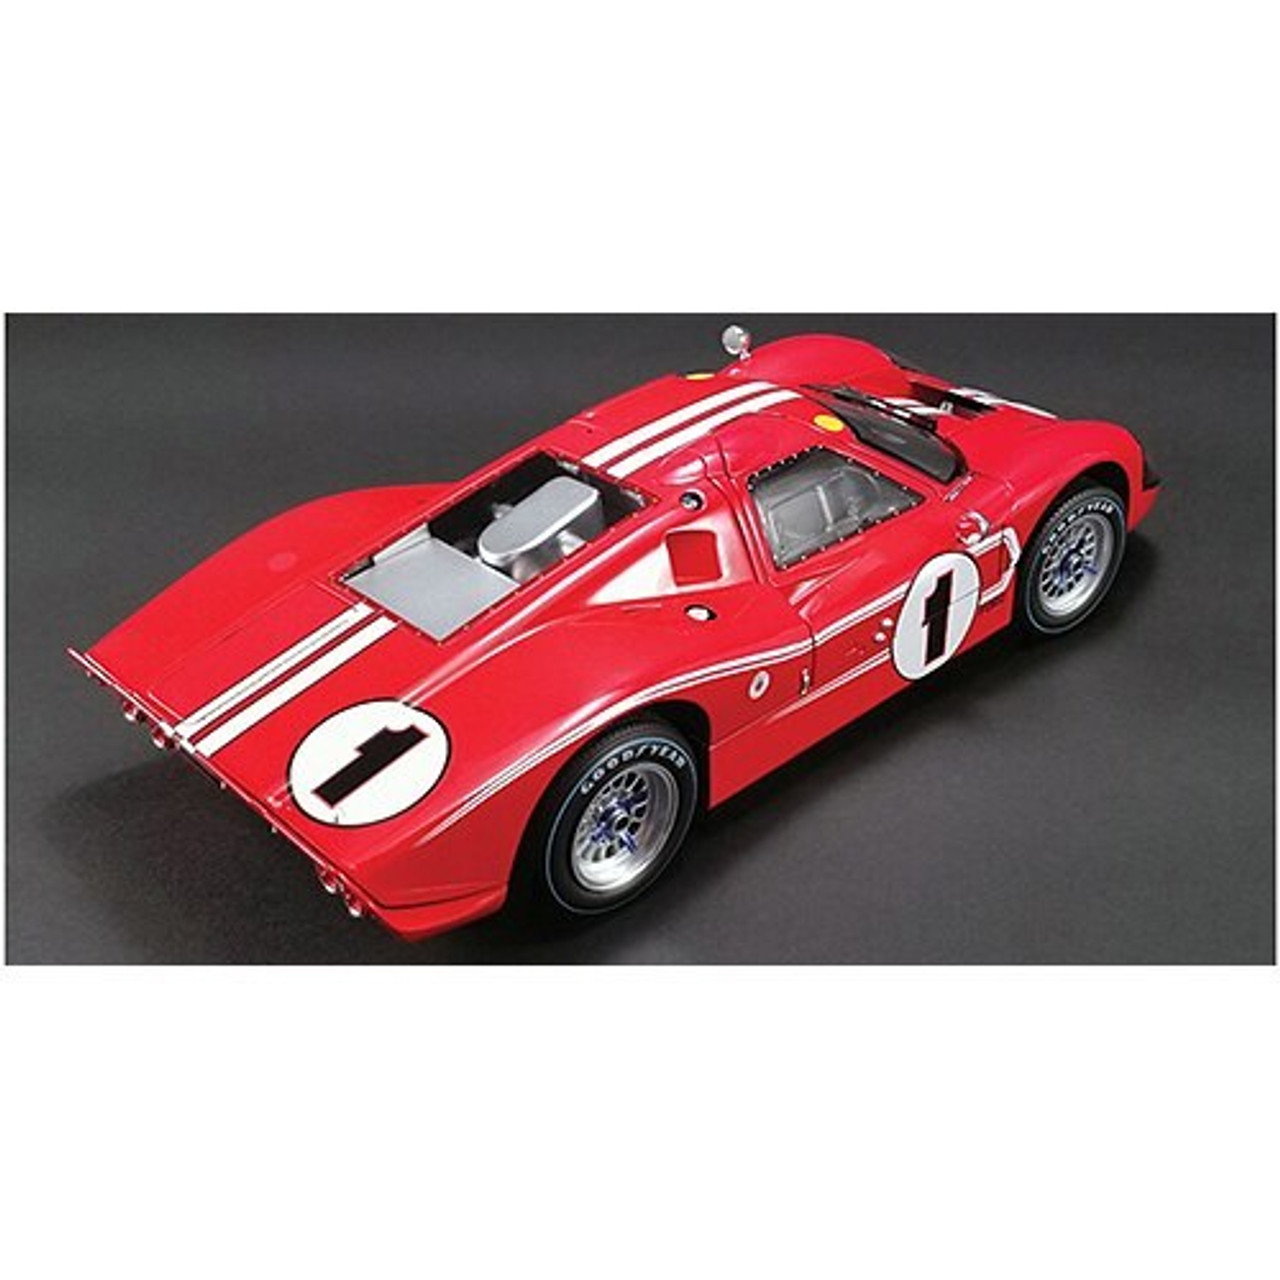 Ford GT40 - Le Mans 1967 - Car Livery by pinoxboss